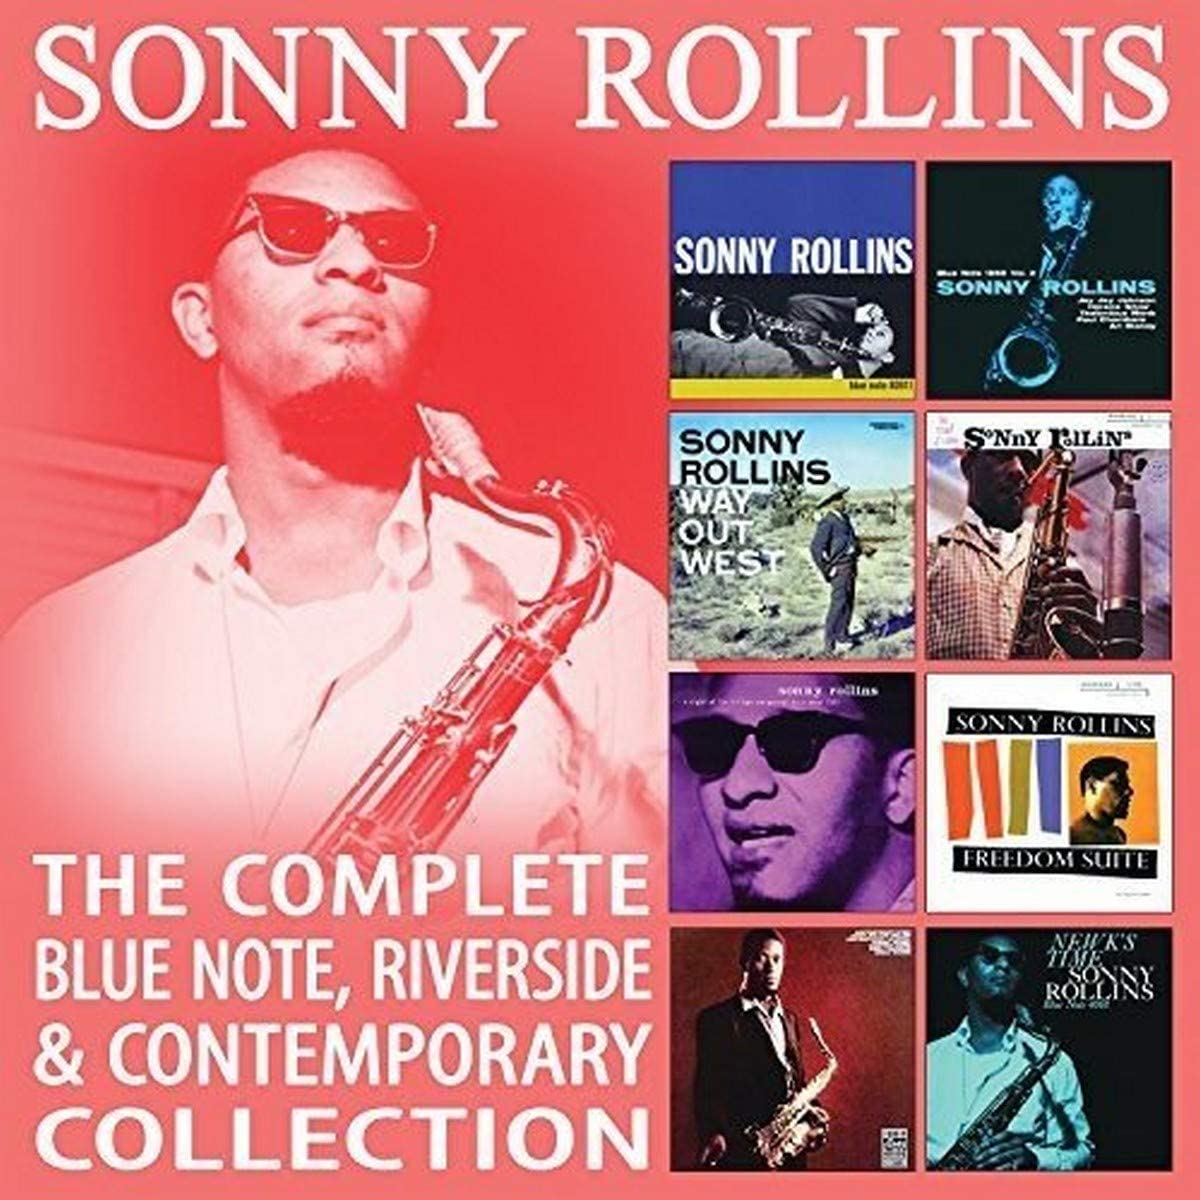 Sonny Rollins - Complete Blue Note, Riverside & Contemporary Collection - 4CD